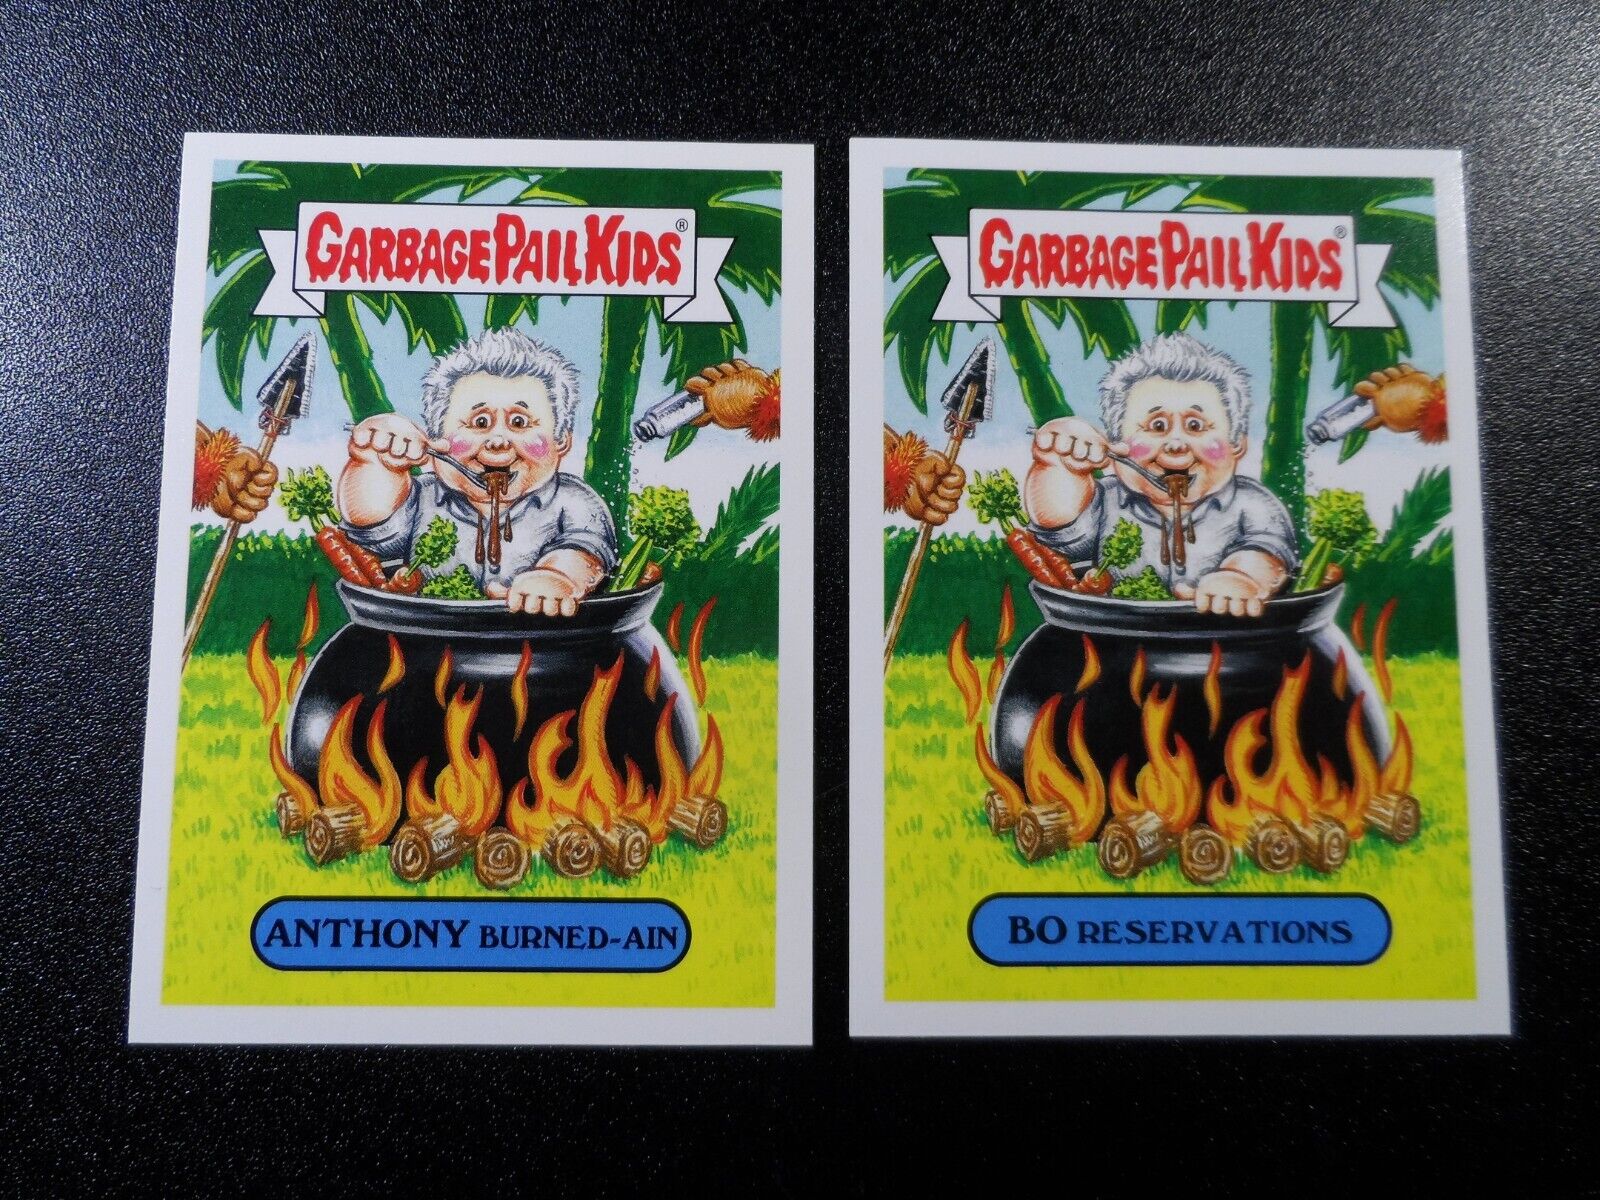 Anthony Bourdain No Reservations Spoof Garbage Pail Kids 2 Card Set